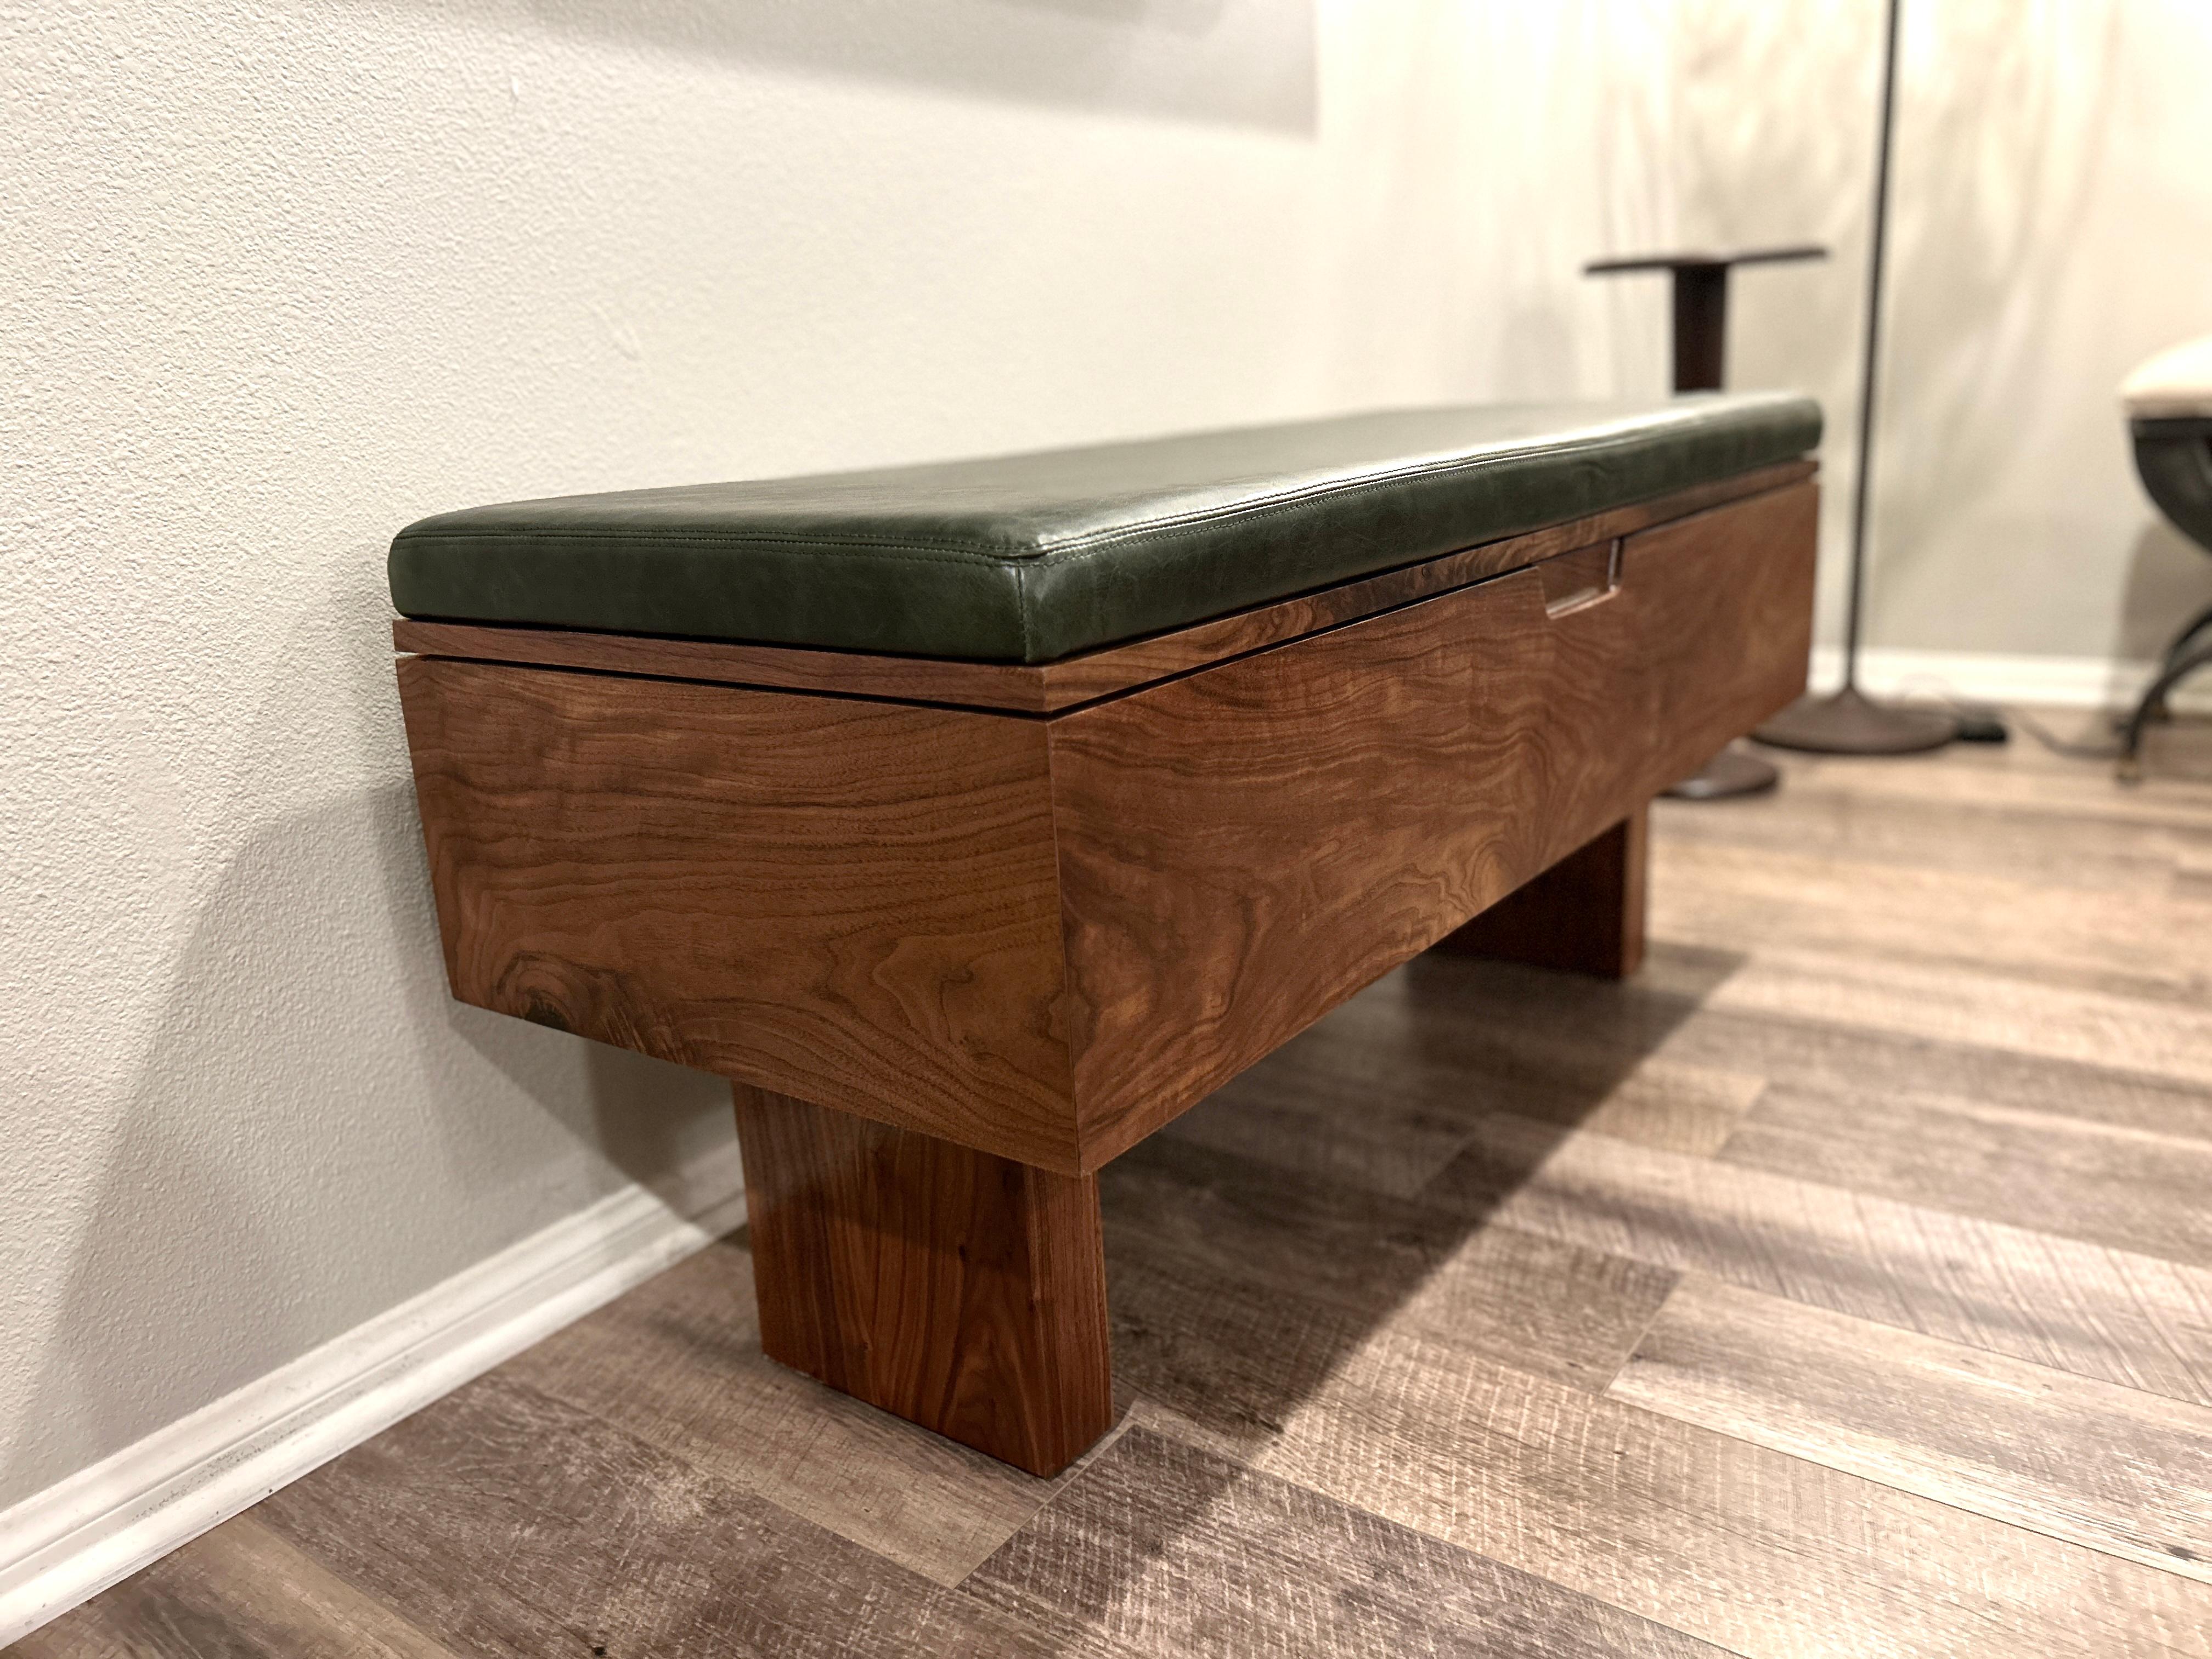 Contemporary 21st Century Modern Walnut Bench with Leather Upholstered Seat Cushion For Sale